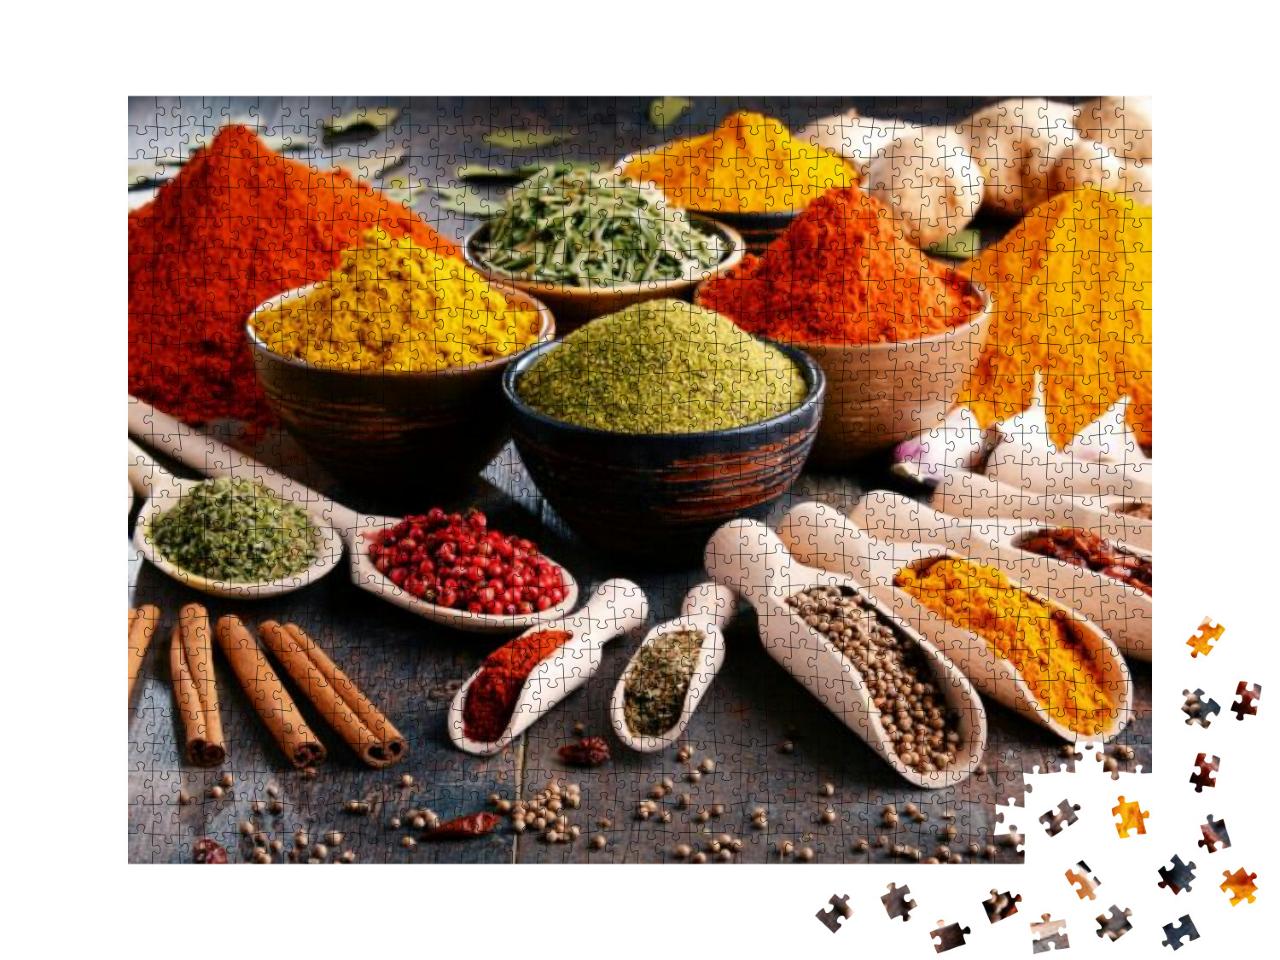 Variety of Spices & Herbs on Kitchen Table... Jigsaw Puzzle with 1000 pieces